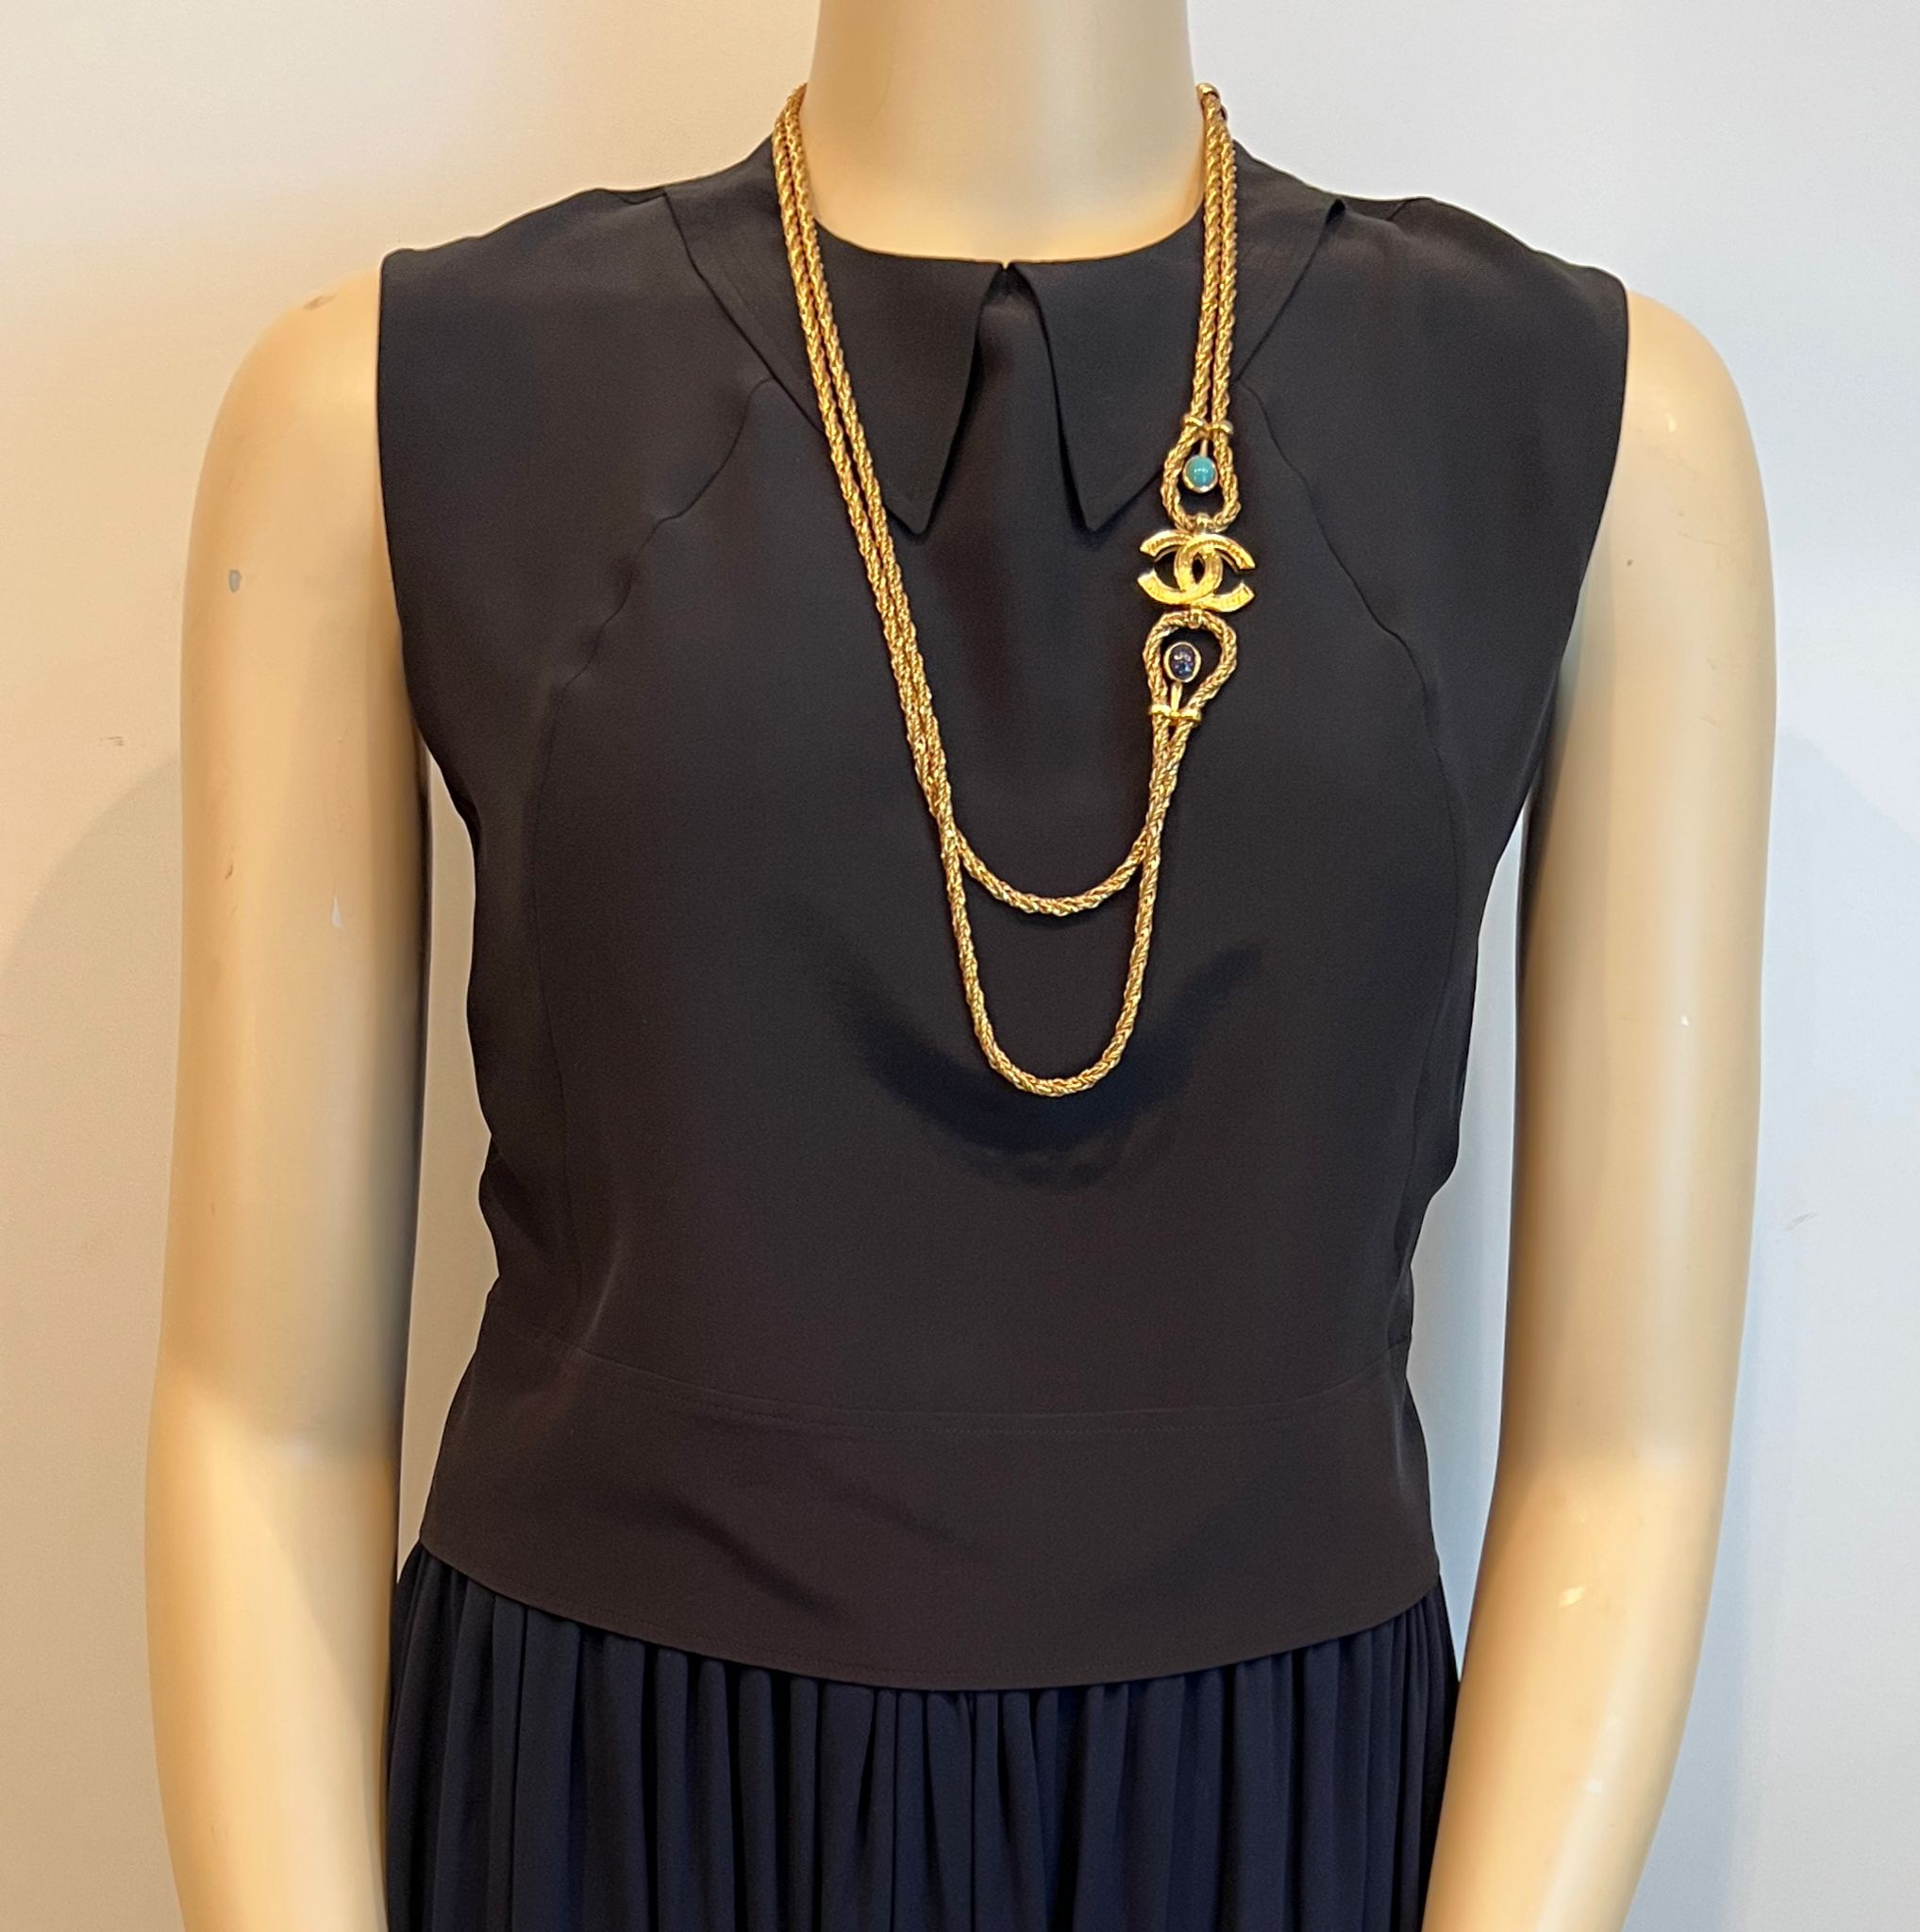 Chanel 19A 2019 Fall Paris Egypt Nile Collection Long Gold Rope Necklace